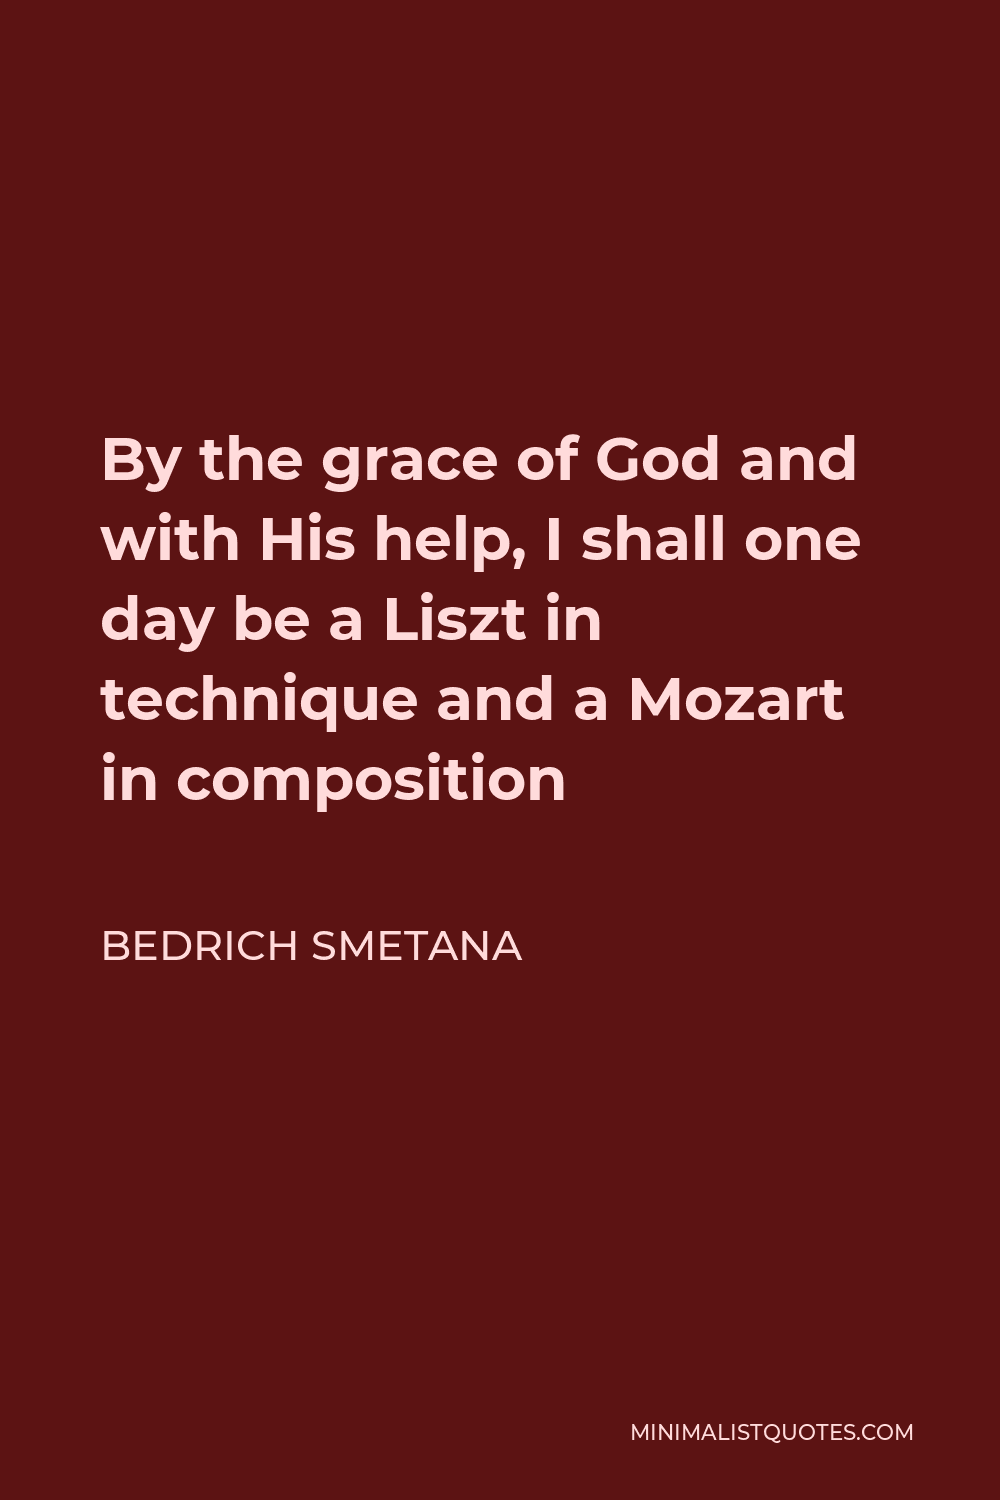 Bedrich Smetana Quote - By the grace of God and with His help, I shall one day be a Liszt in technique and a Mozart in composition